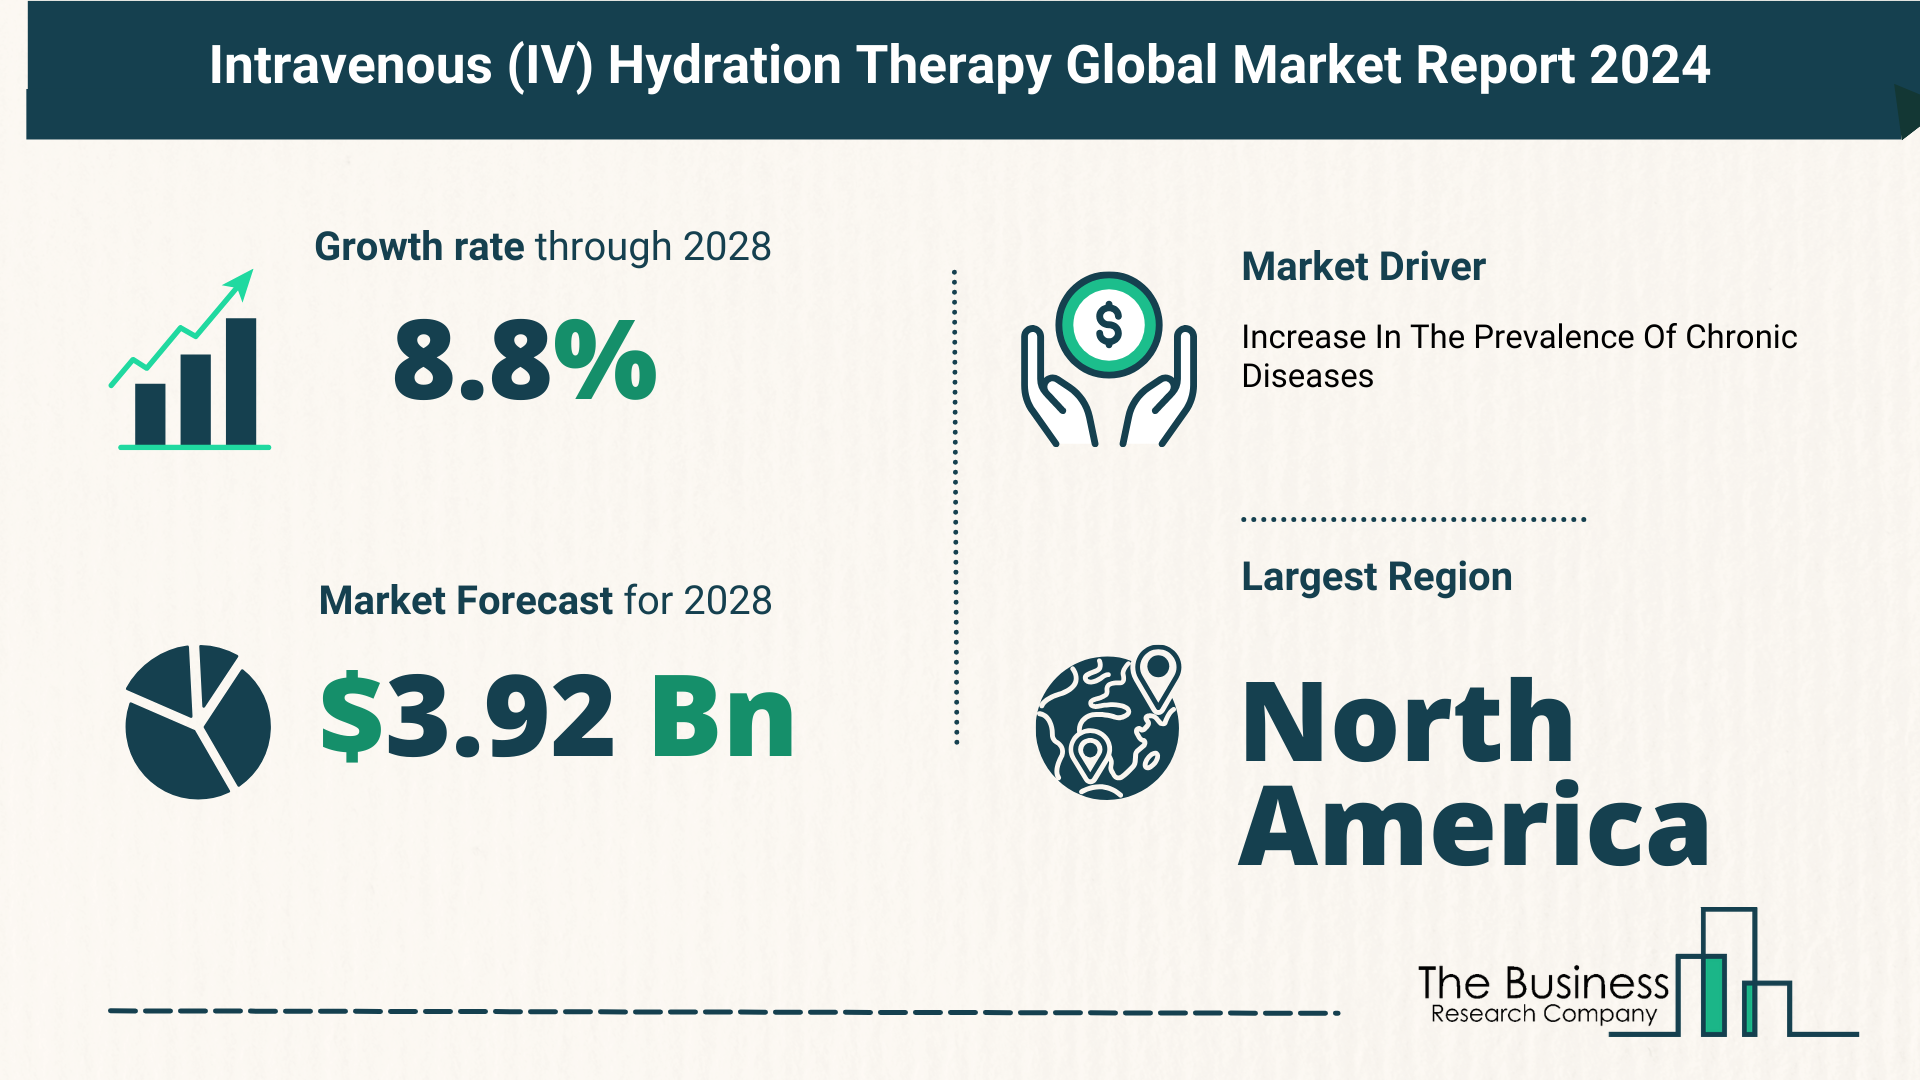 Global Intravenous (IV) Hydration Therapy Market